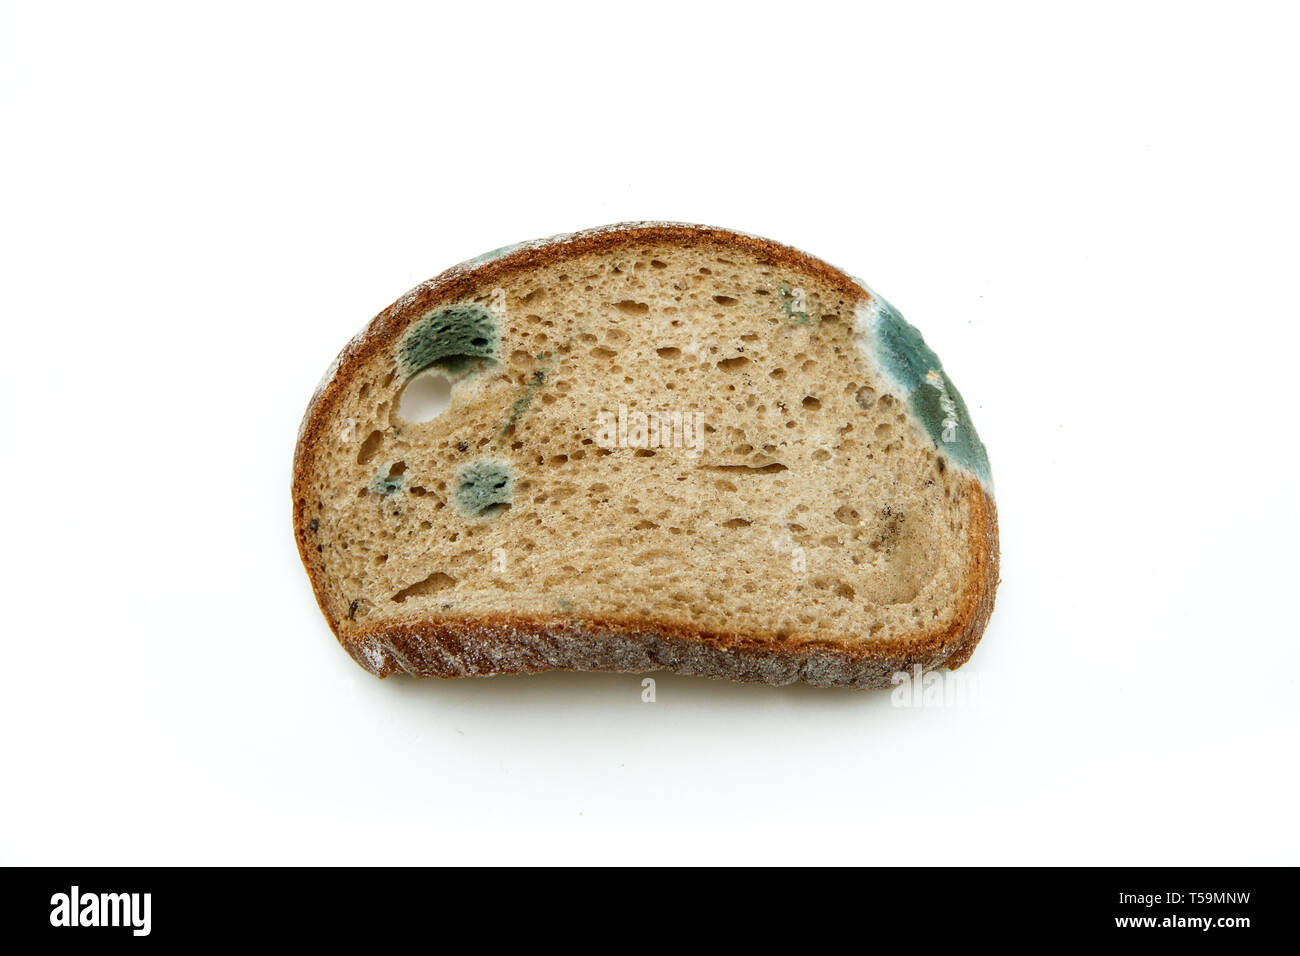 The picture of a mouldy bread. Rotten and uneatable. Isolated on white background. Stock Photo